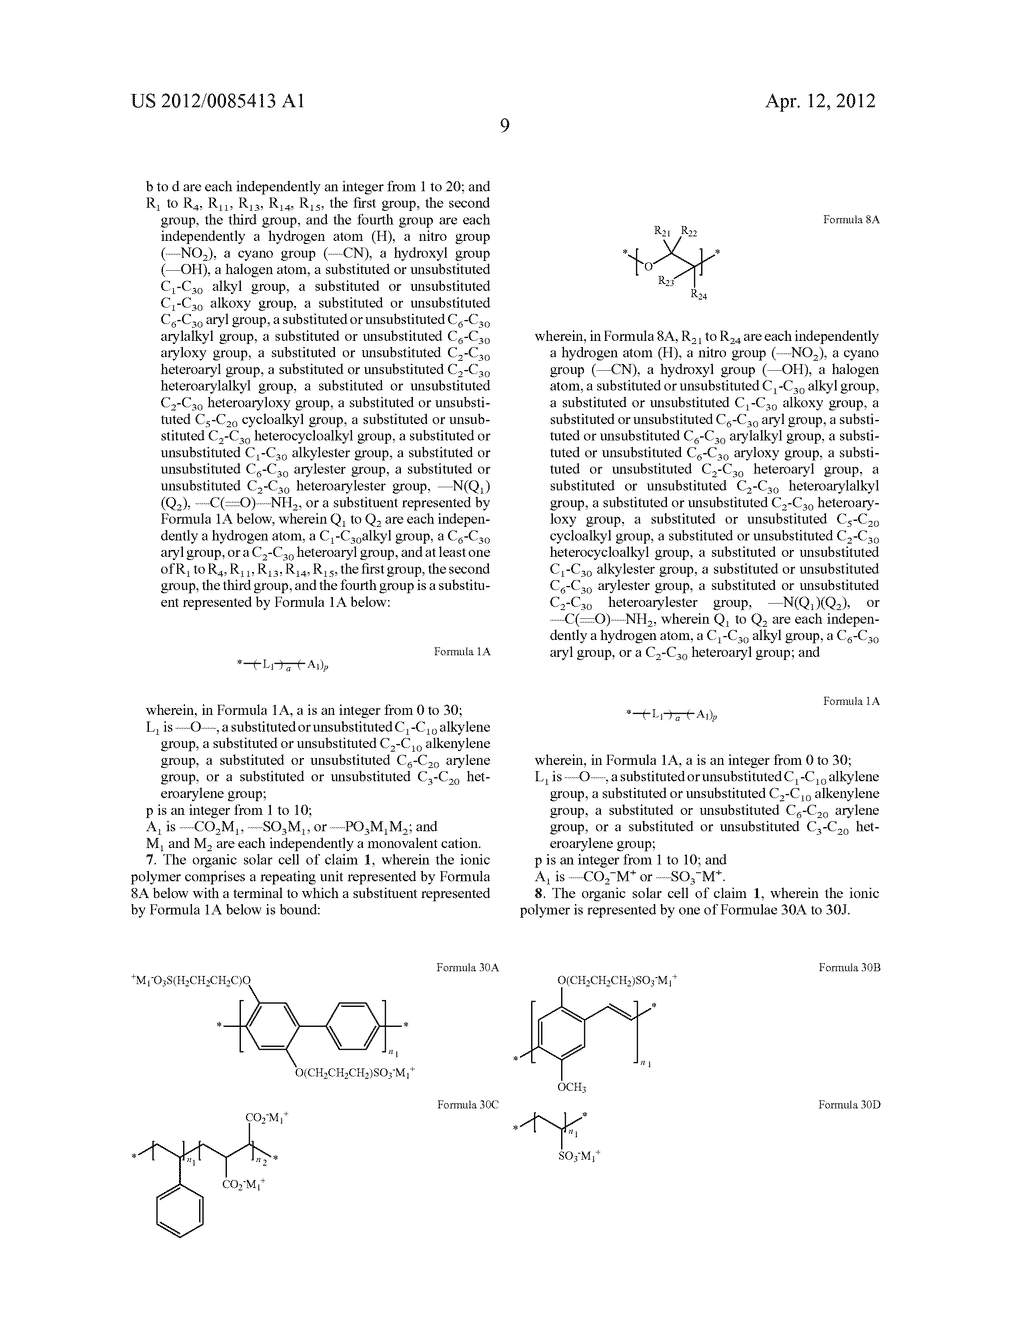 ORGANIC SOLAR CELL AND METHOD OF MANUFACTURING THE SAME - diagram, schematic, and image 12